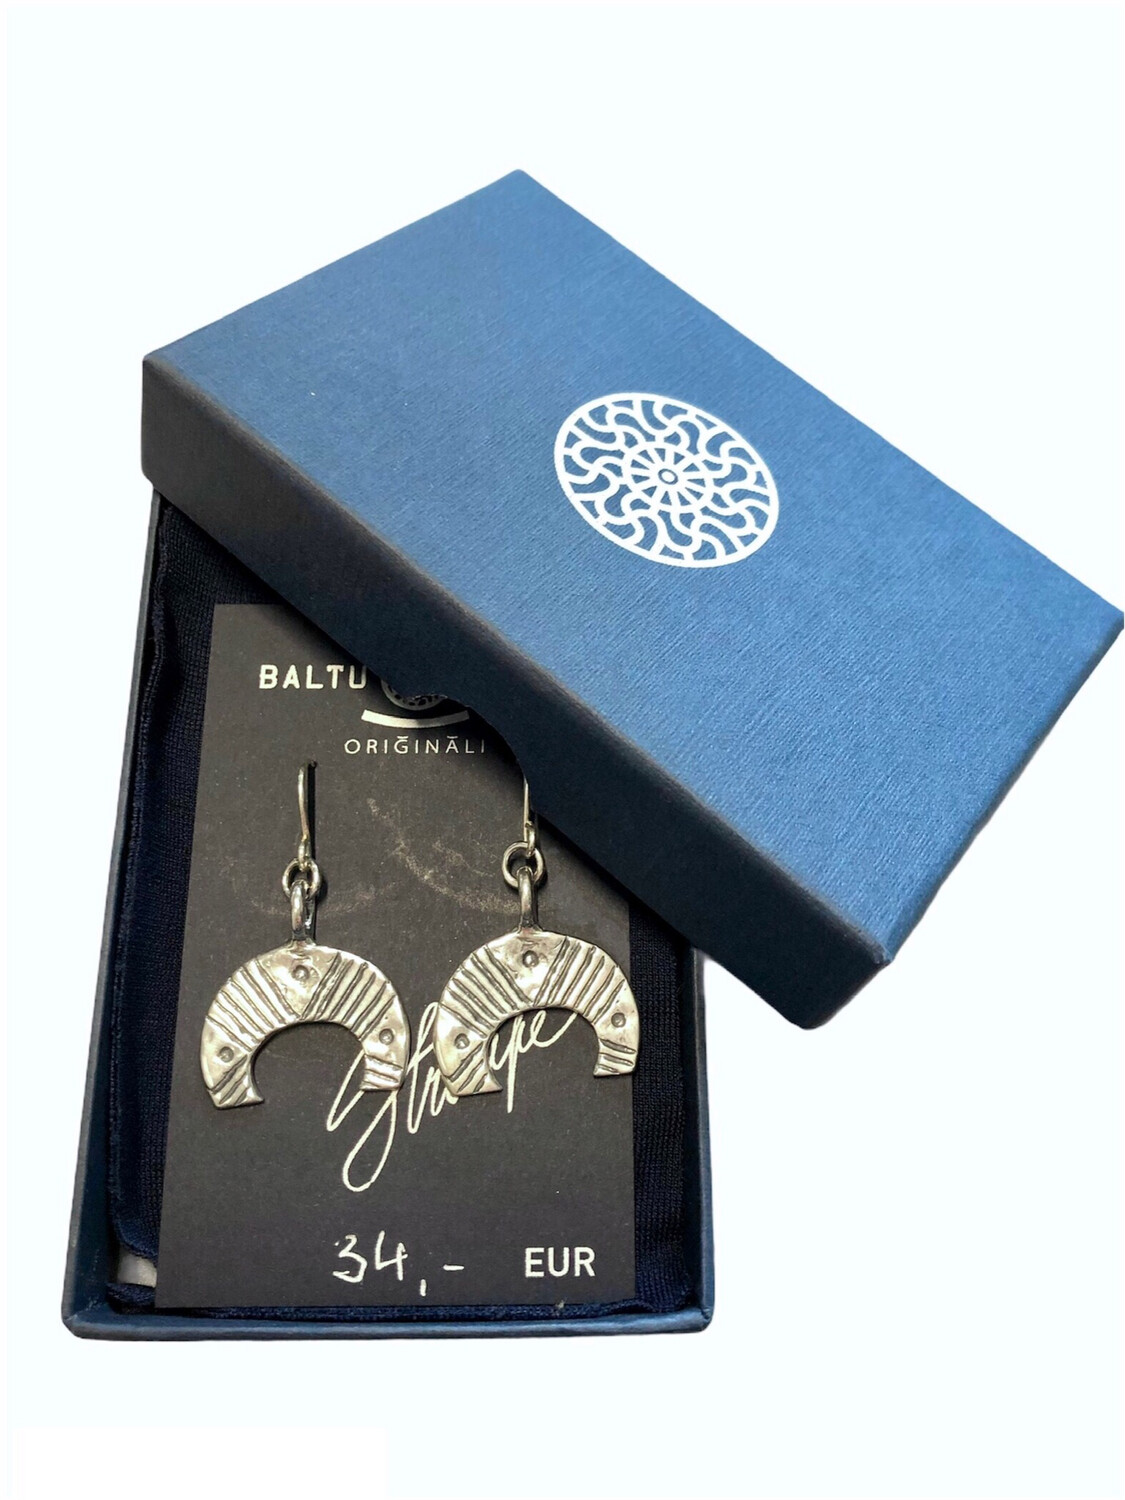 Earrings with moon symbol